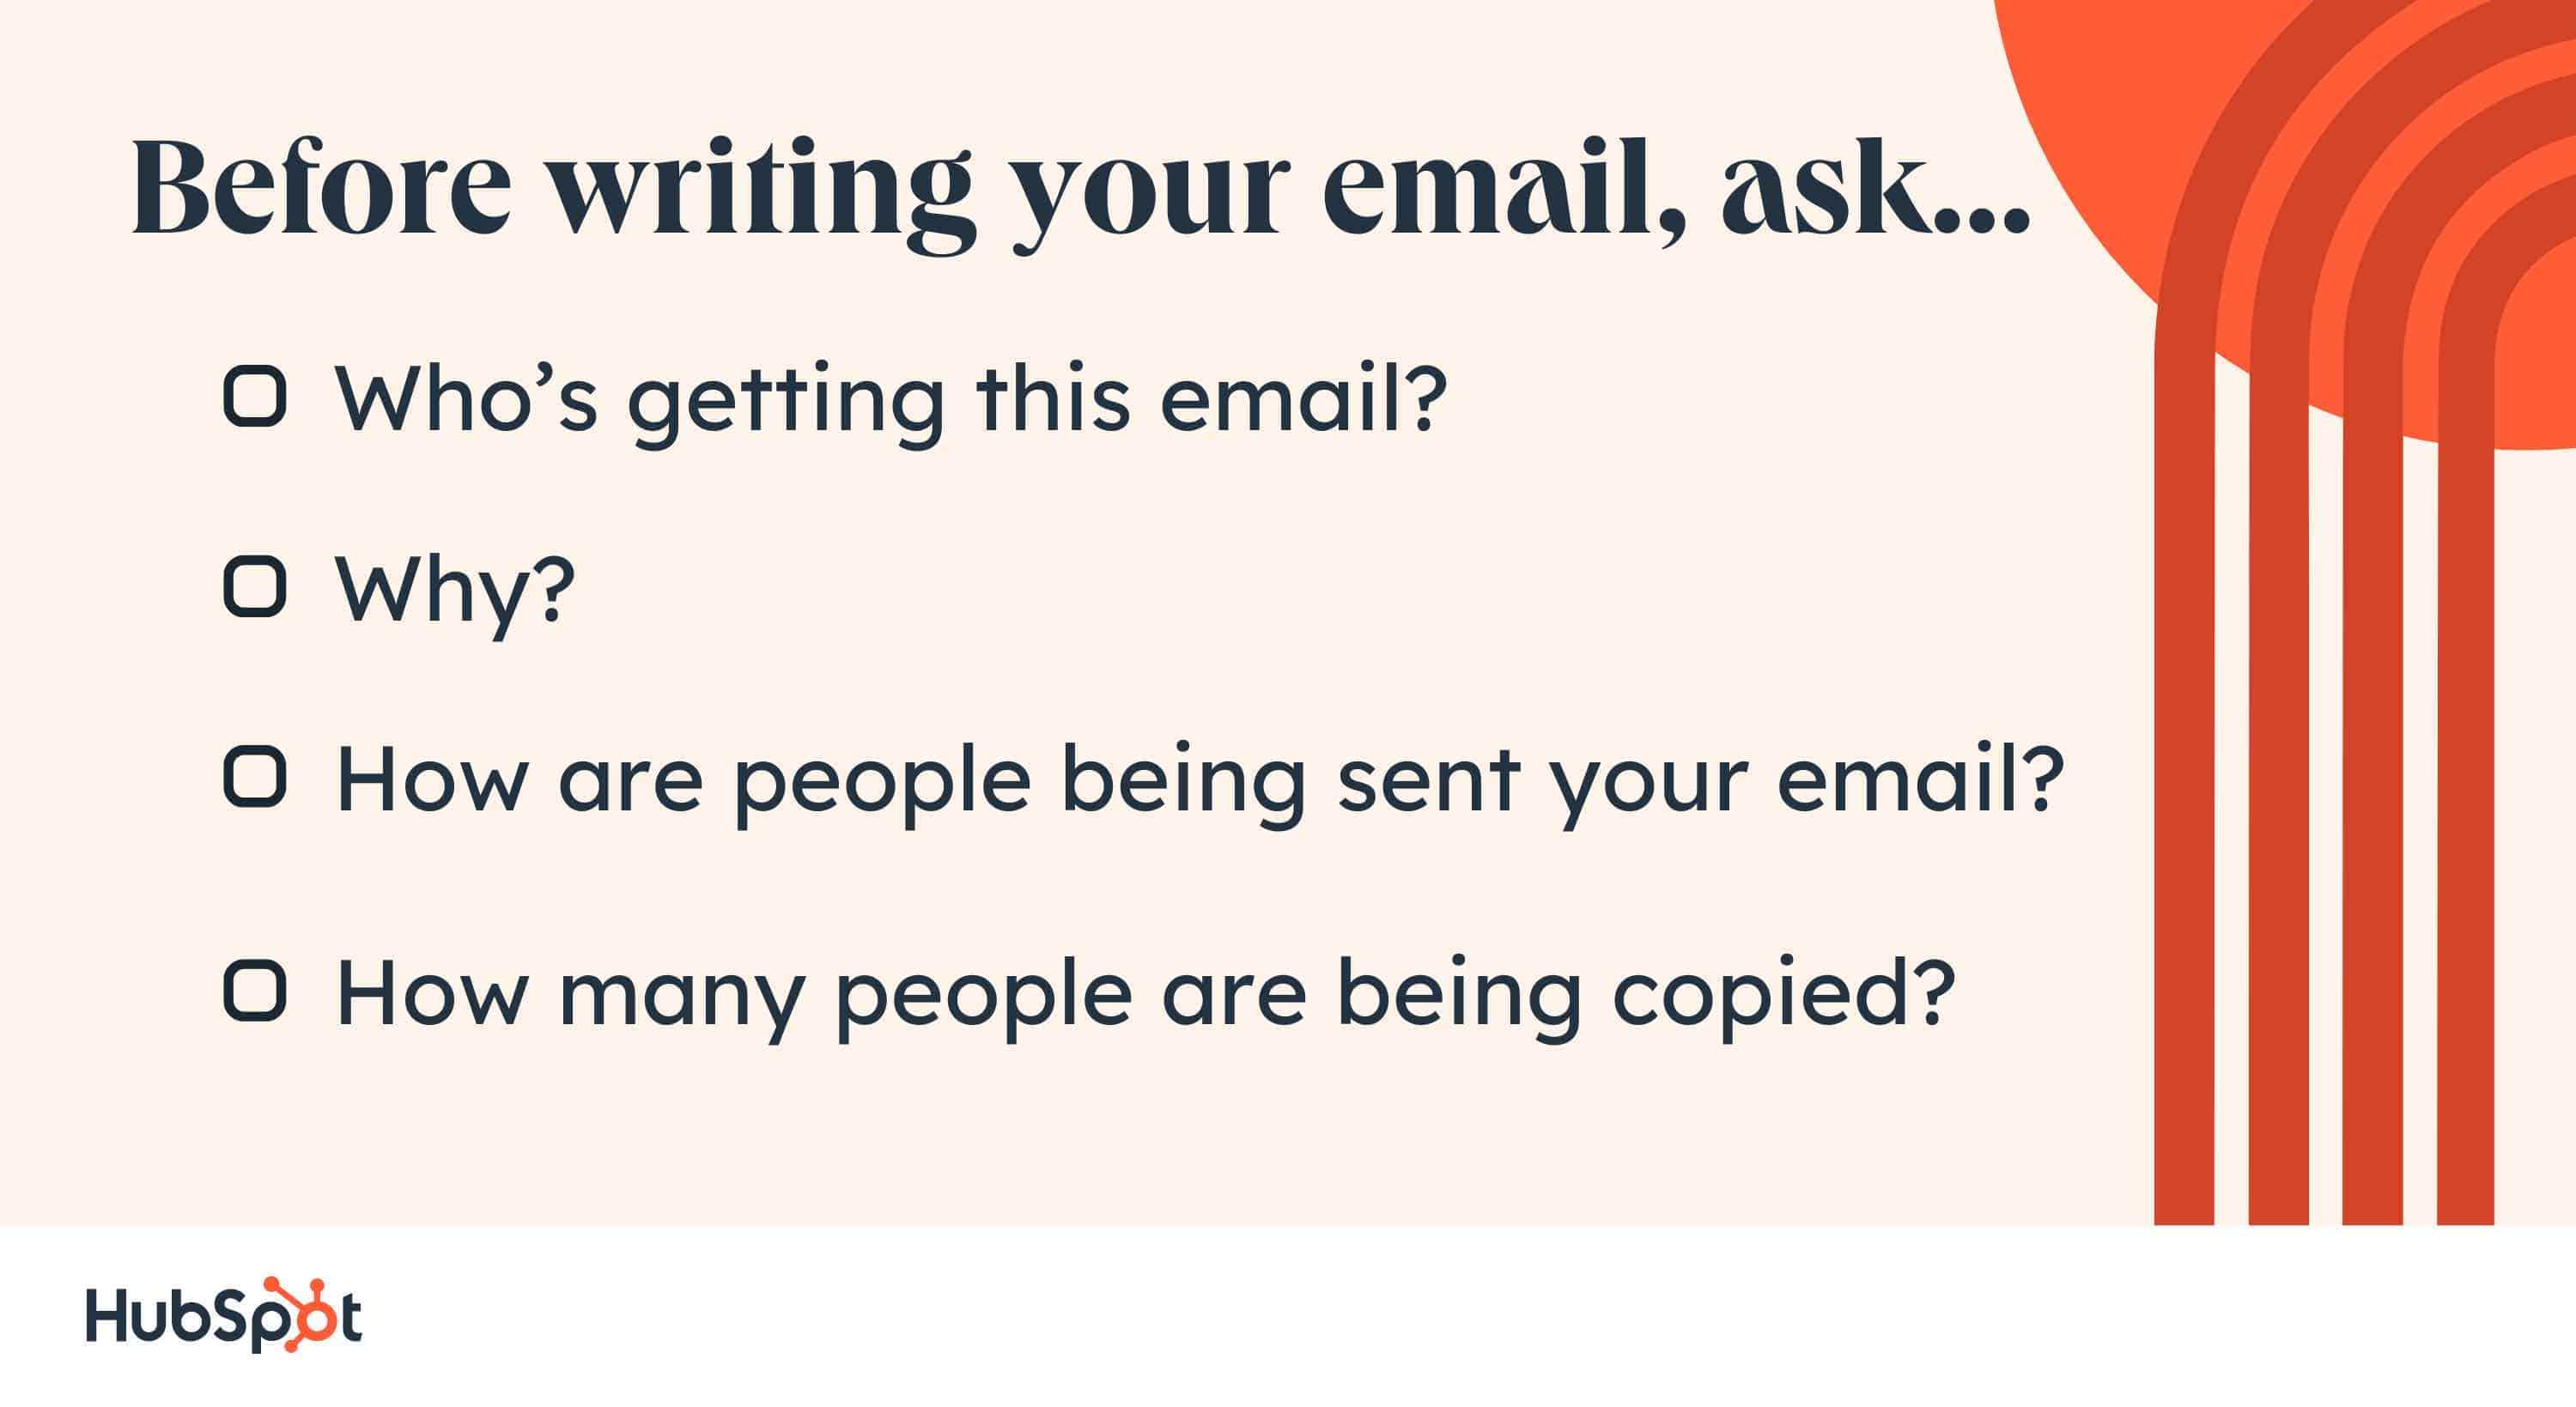 before writing your email, ask… who’s getting this email? Why? How are people being sent your email? How many people are being copied?